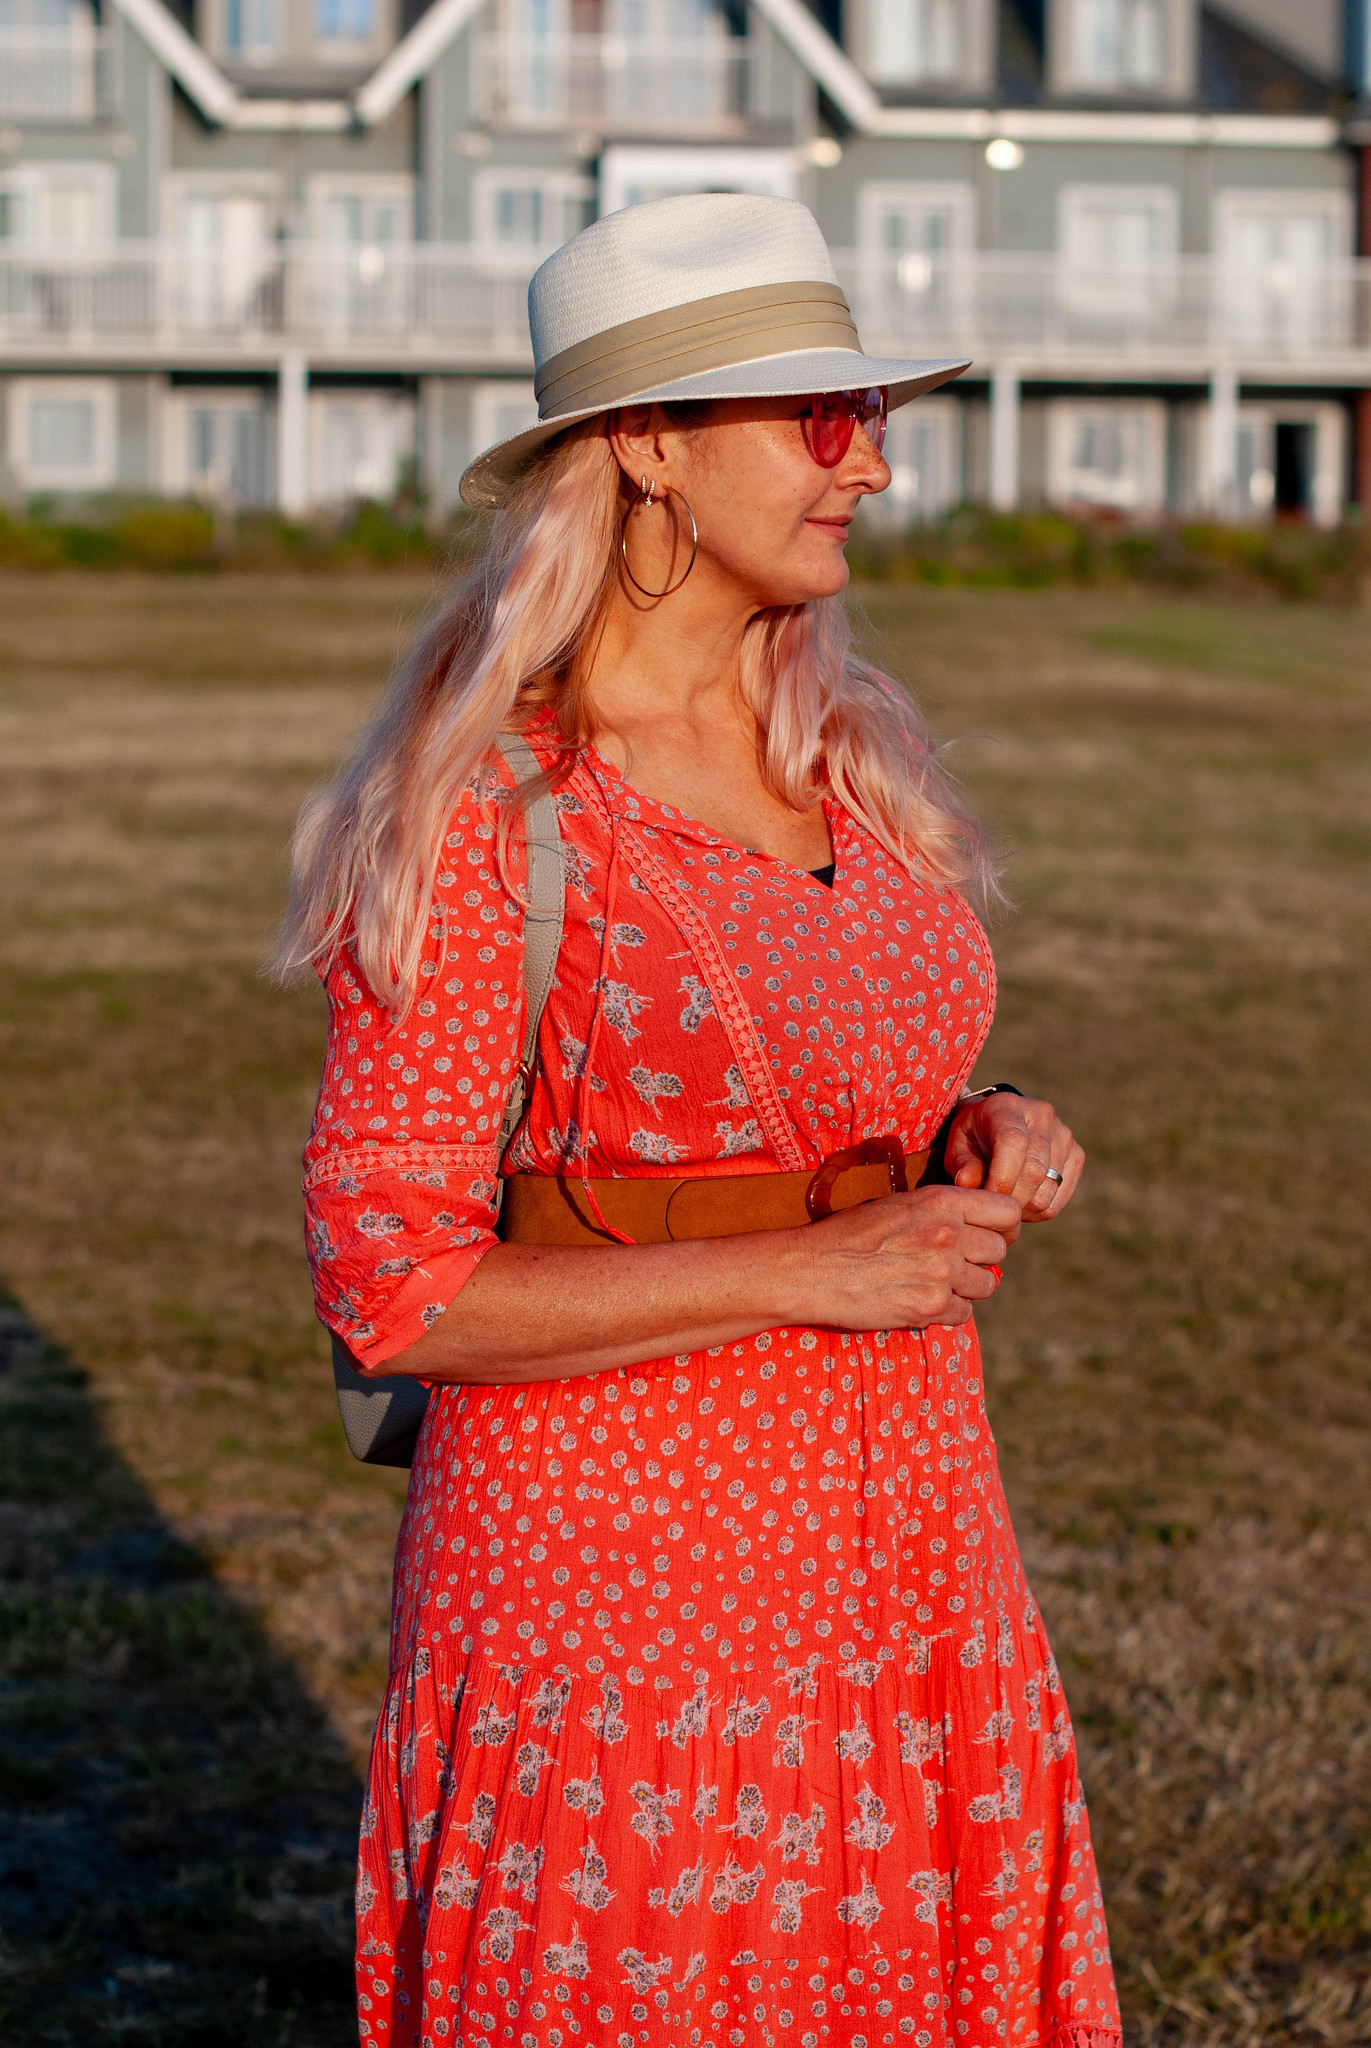 Styling My Classic Boho Maxi Dress (Again!) in Cornwall | Catherine Summers AKA Not Dressed As Lamb, Over 50 Style Blog